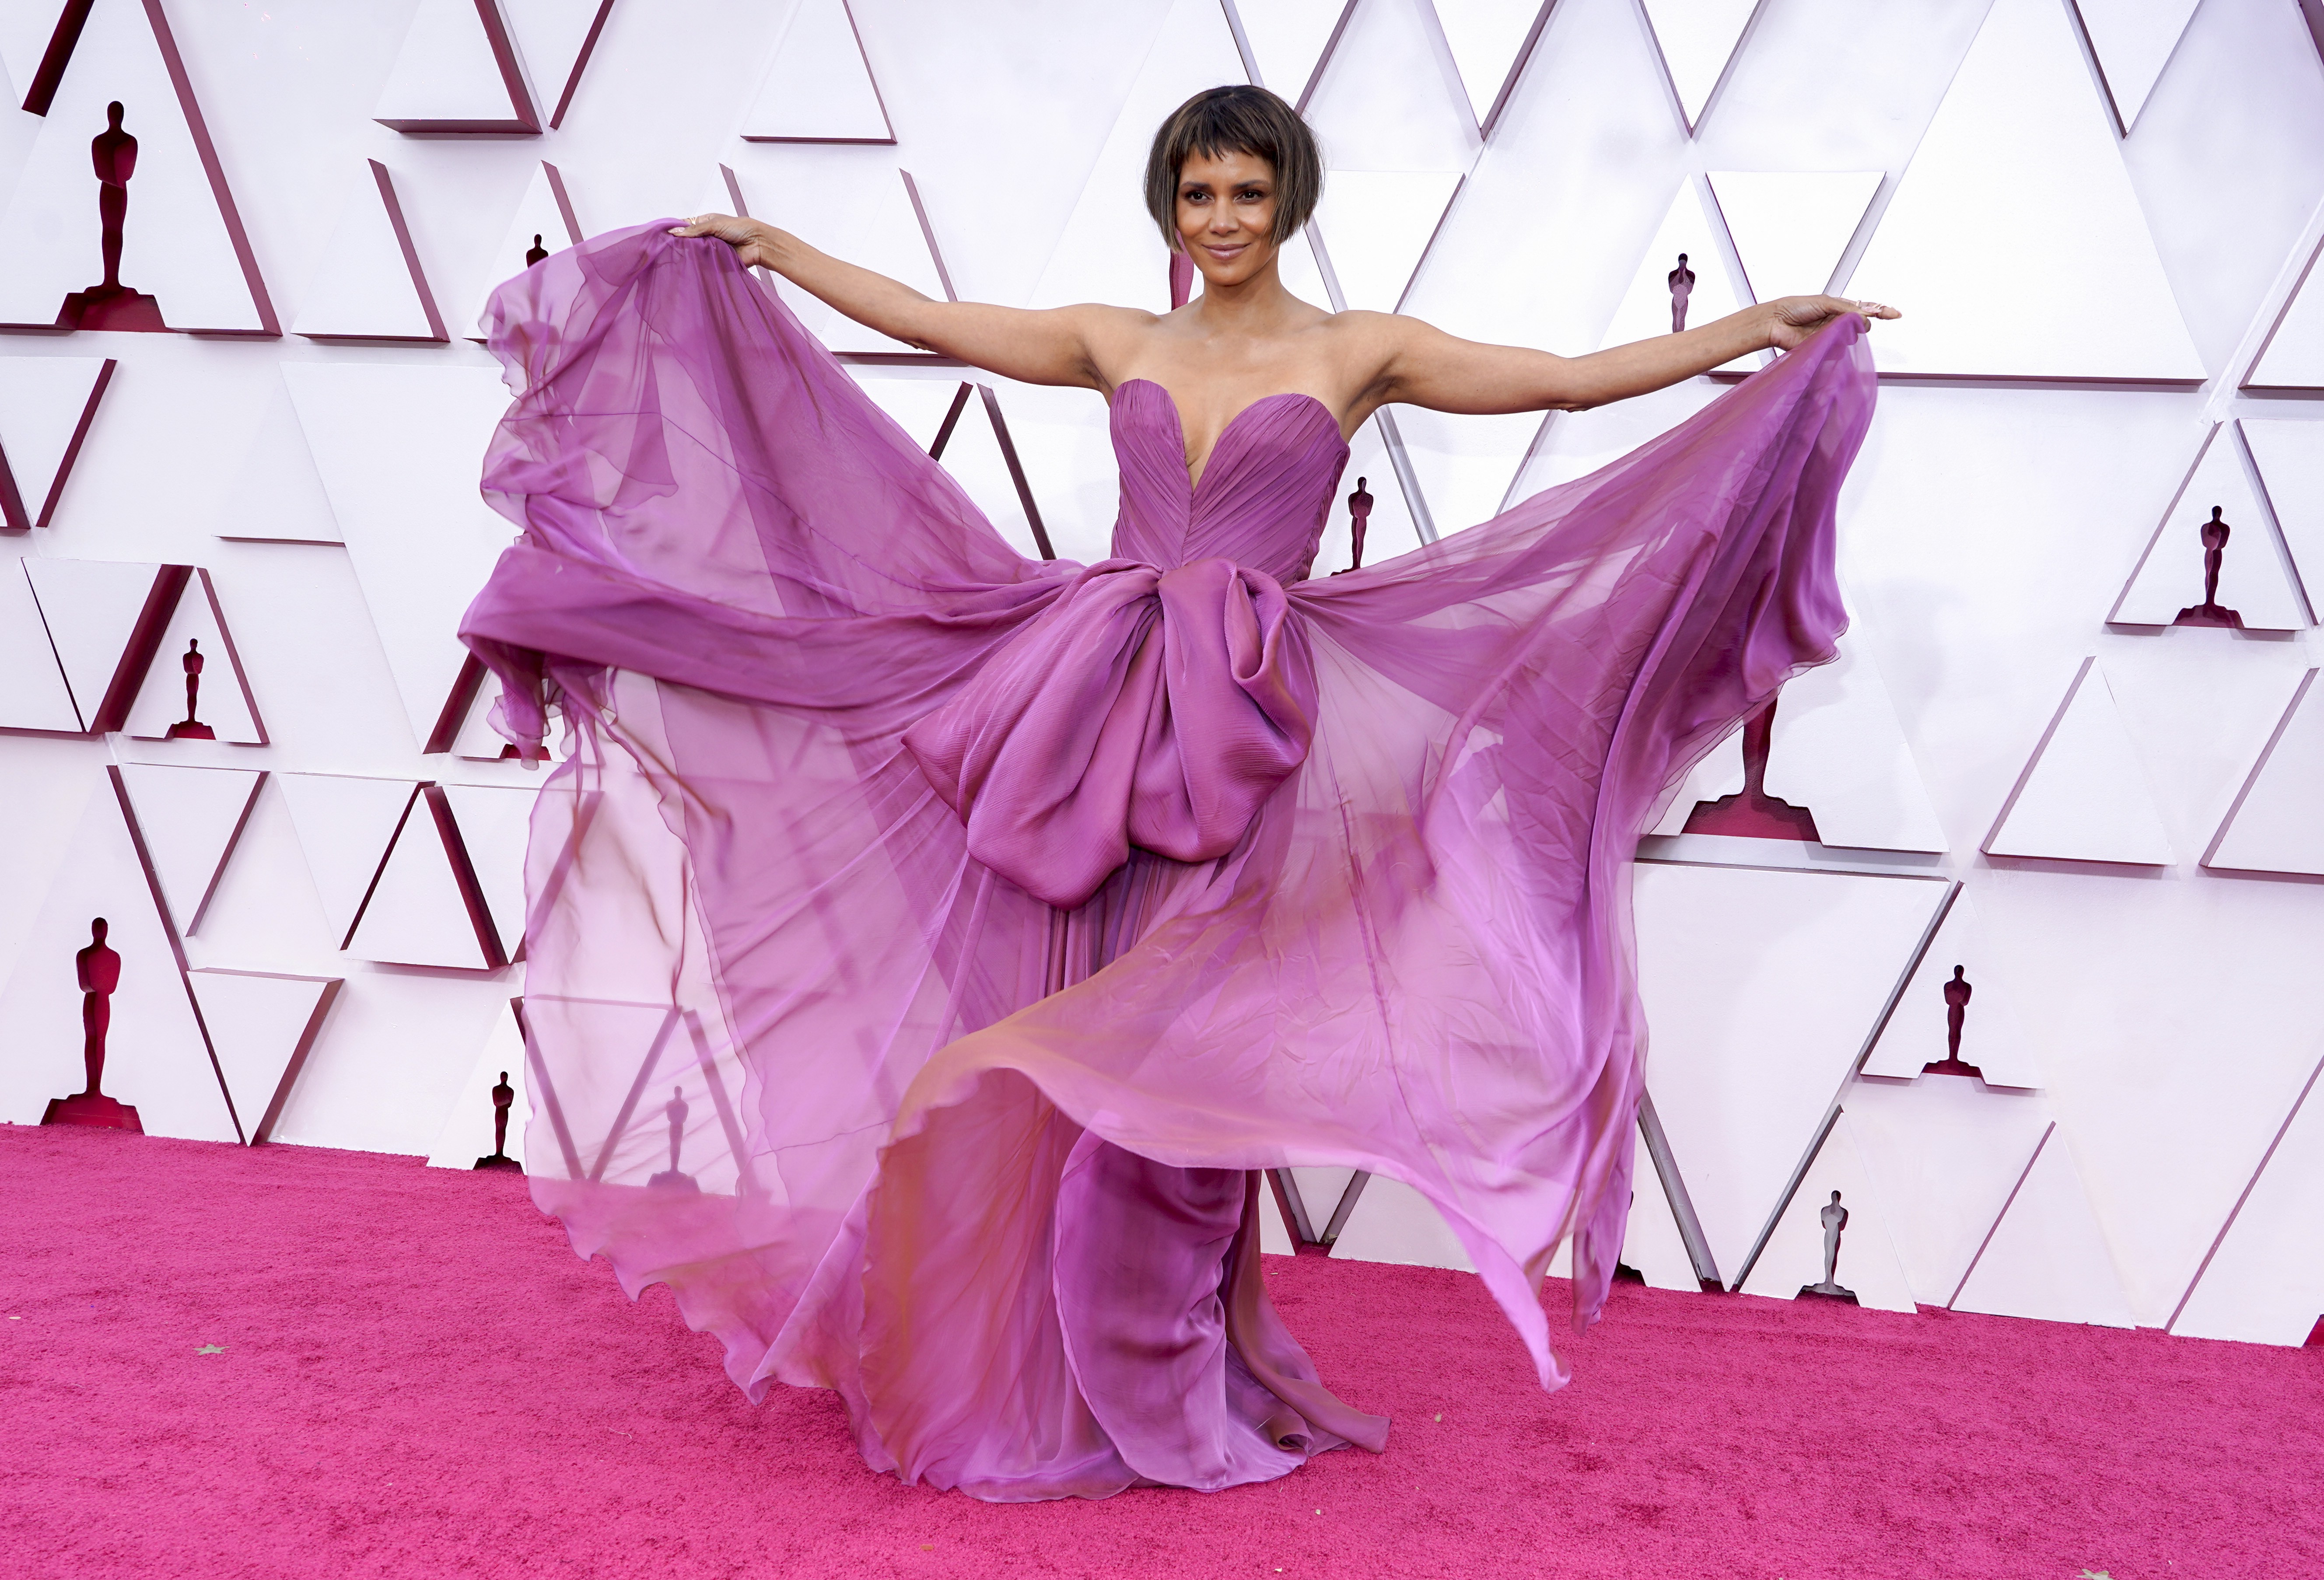 LOS ANGELES, CALIFORNIA – APRIL 25: Halle Berry attends the 93rd Annual Academy Awards at Union Station on April 25, 2021 in Los Angeles, California. (Photo by Chris Pizzello-Pool/Getty Images) (Foto: Getty Images)